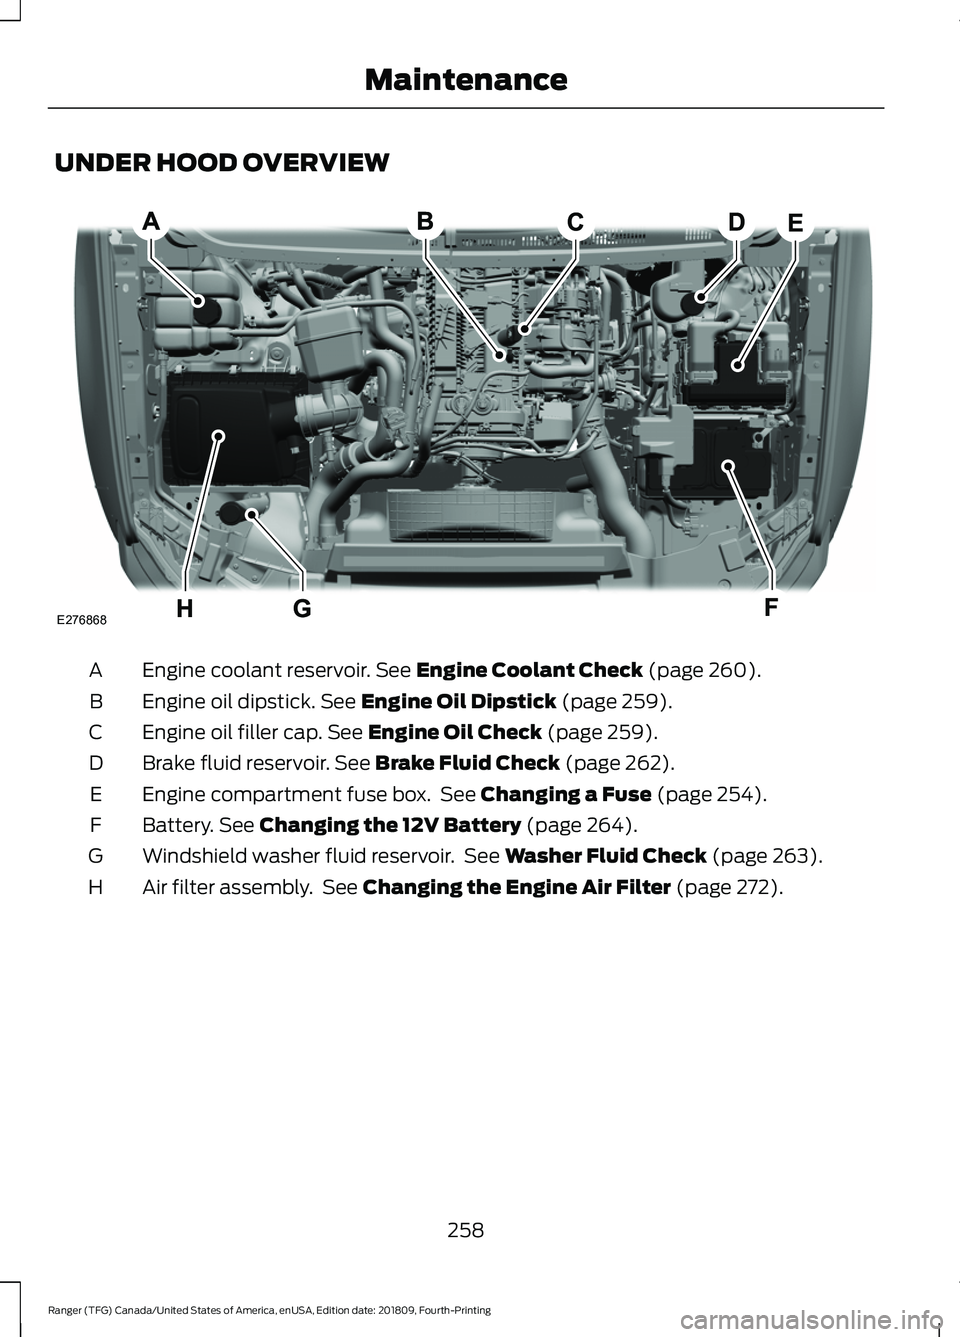 FORD RANGER 2019  Owners Manual UNDER HOOD OVERVIEW
Engine coolant reservoir. See Engine Coolant Check (page 260).
A
Engine oil dipstick.
 See Engine Oil Dipstick (page 259).
B
Engine oil filler cap.
 See Engine Oil Check (page 259)